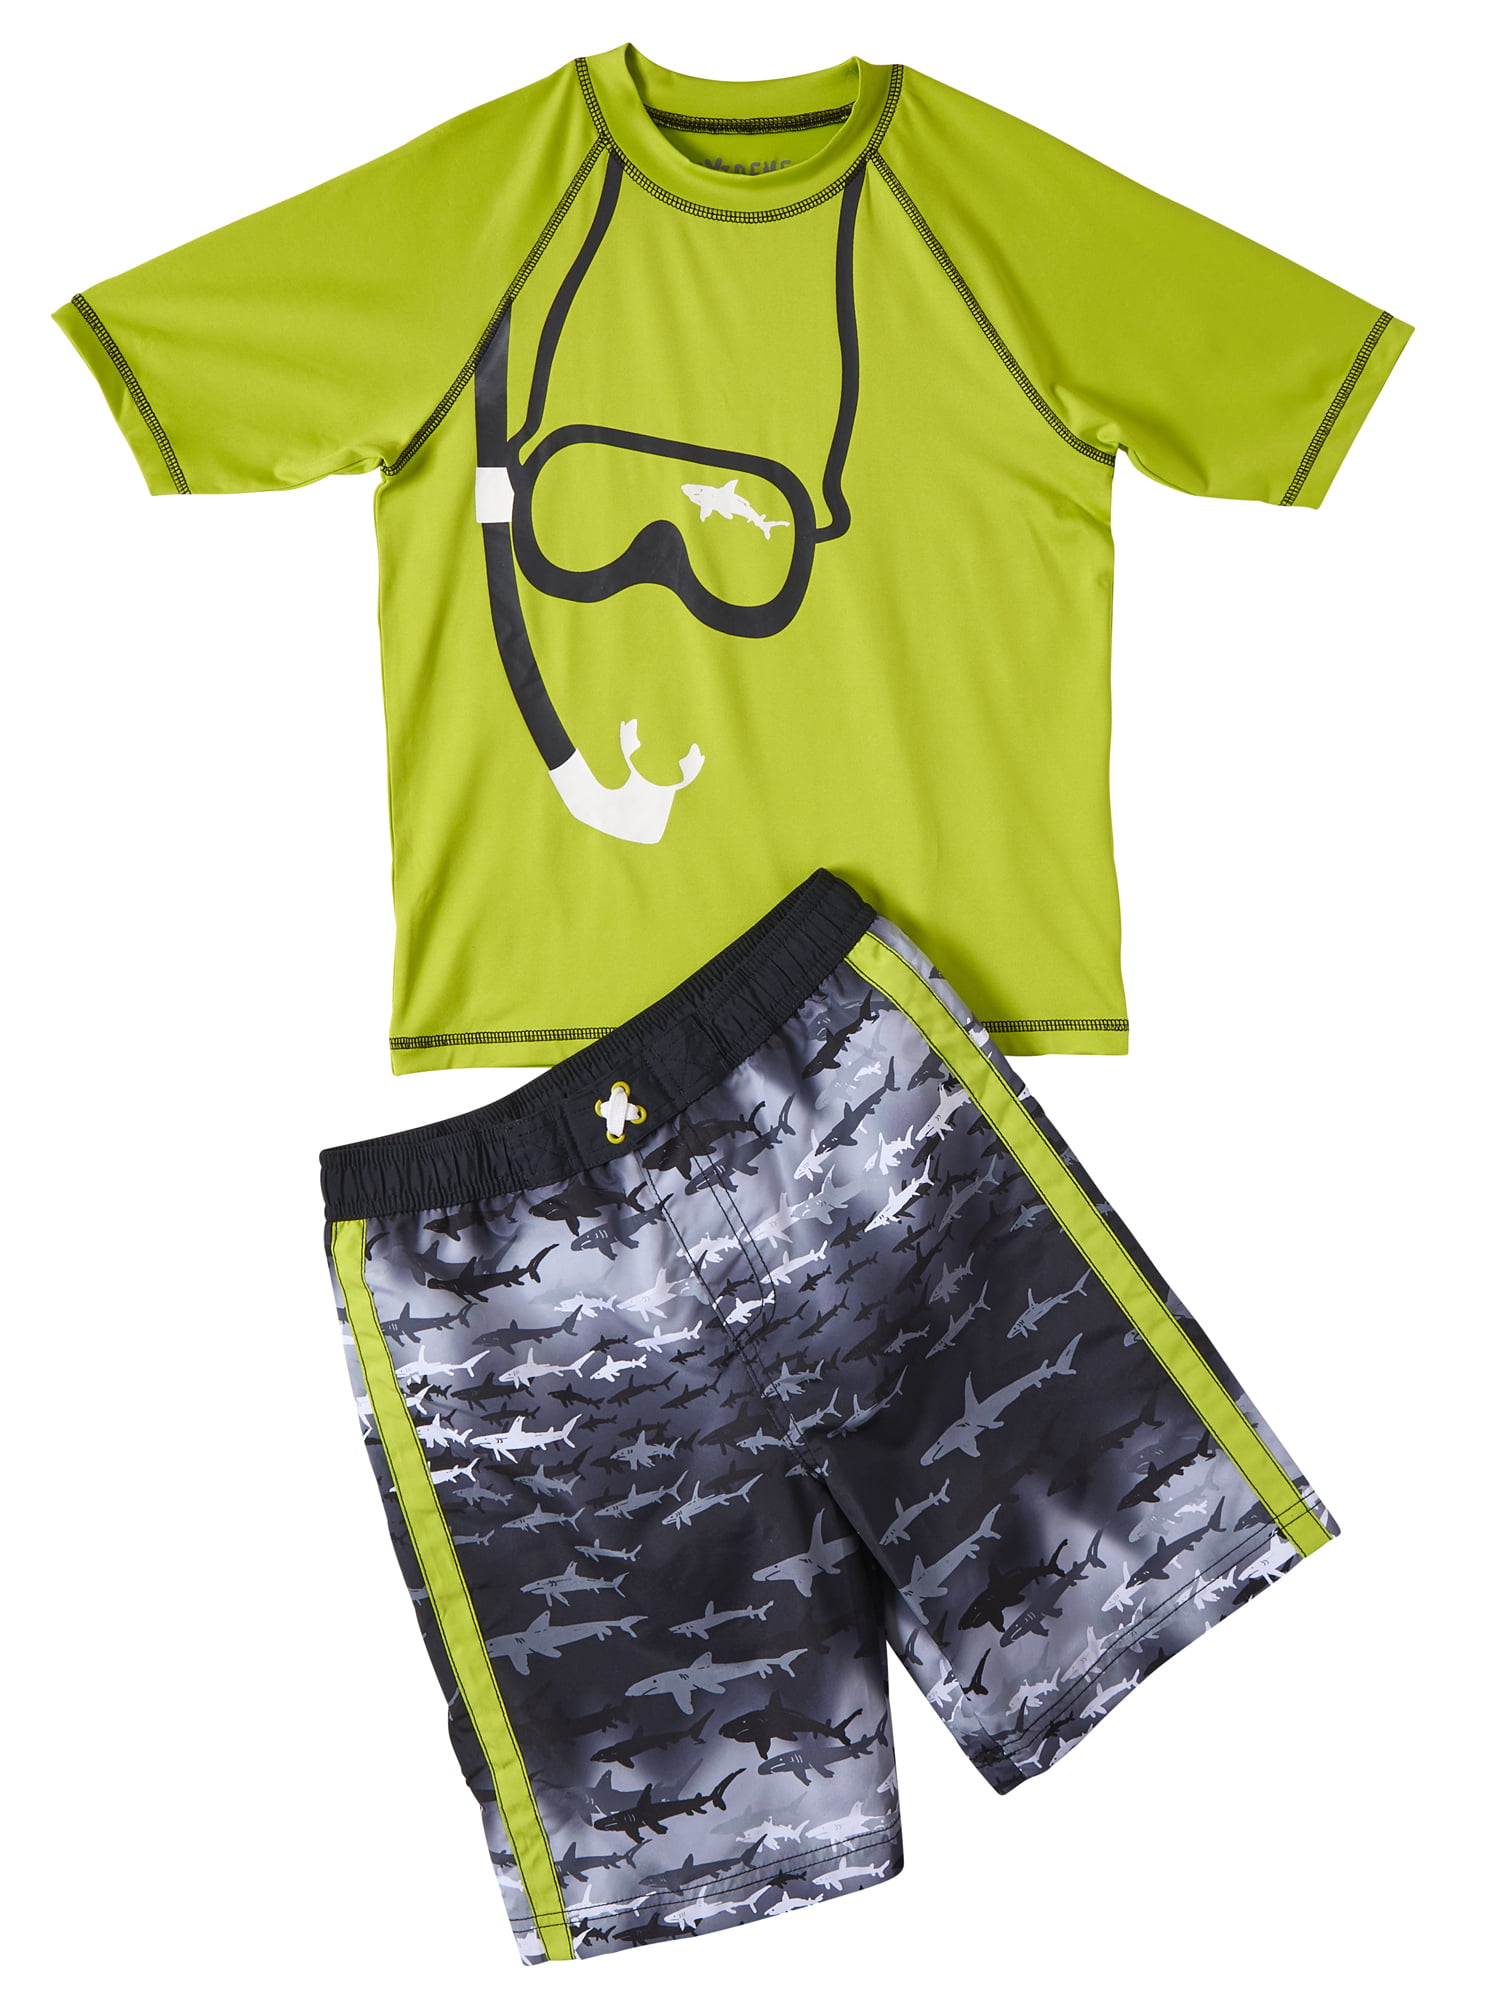 Details about   iXtreme Baby Boys Printed Swim Trunks 